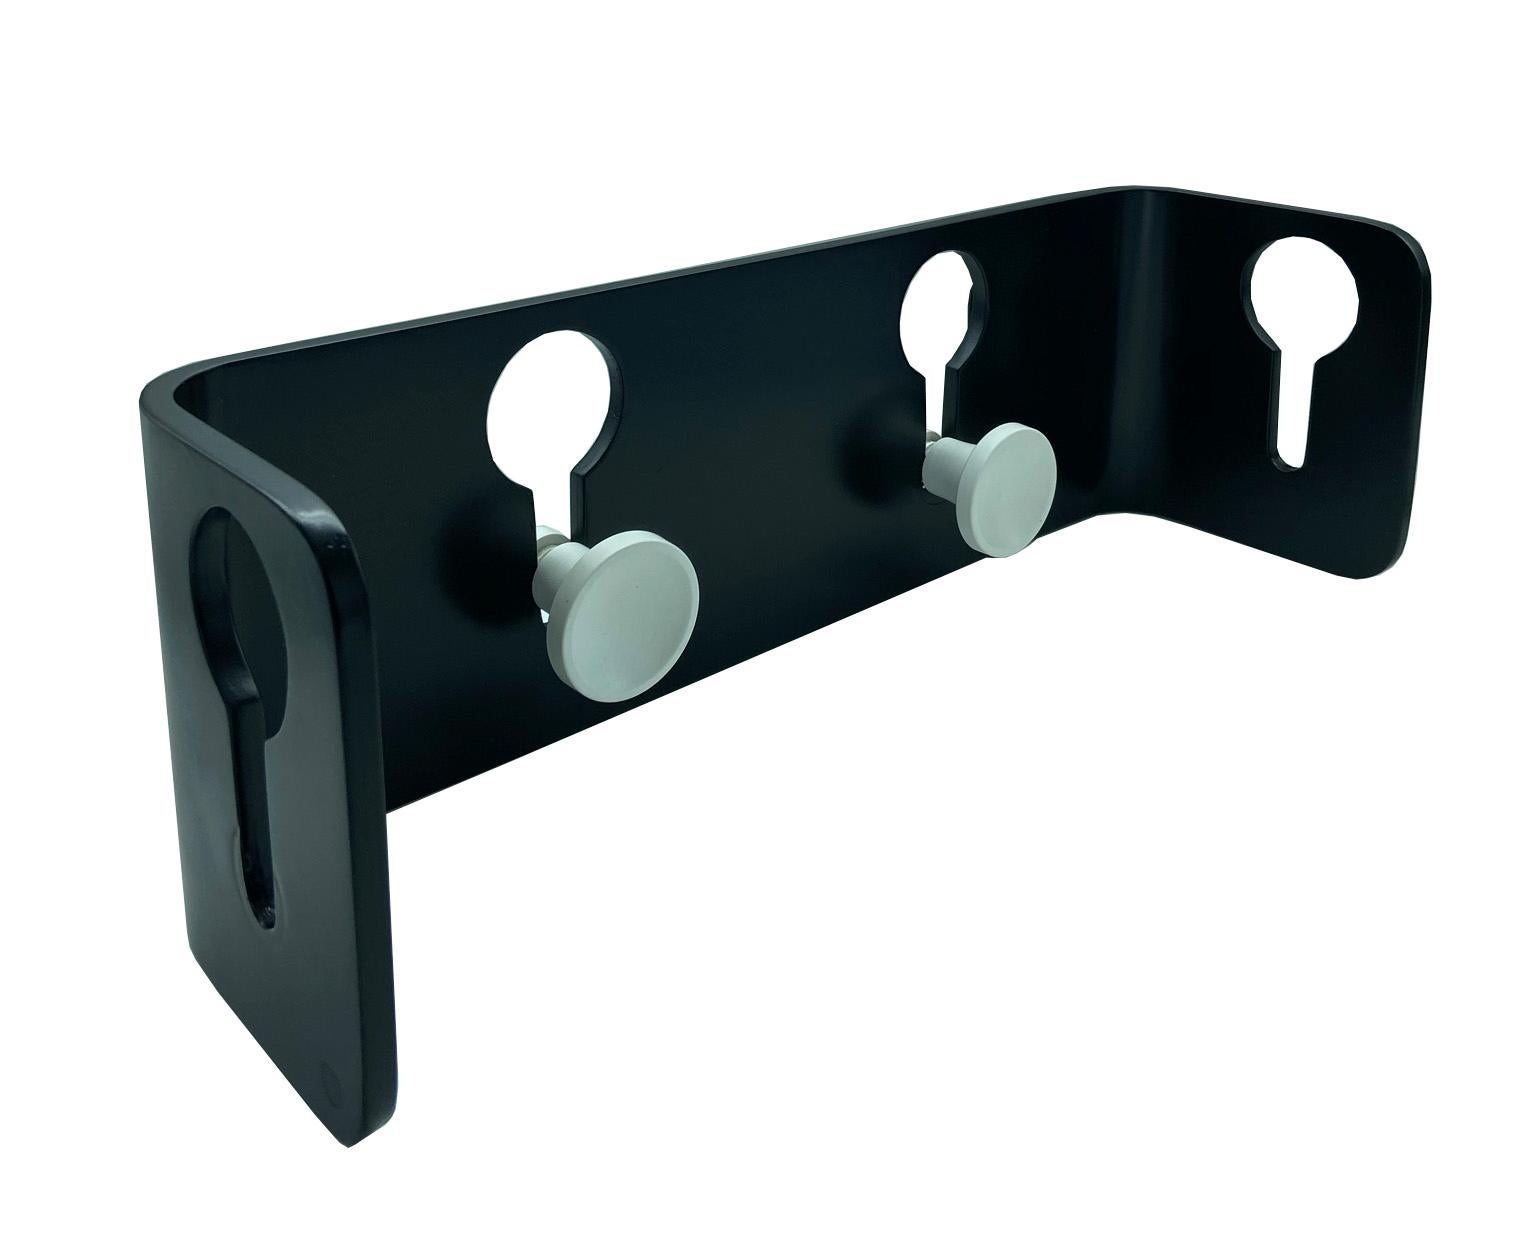 Delightful little coat hanger designed by Carlo de Carli for Fiarm in the 1960s. Made of black lacquered wood. The hooks are in Bakelite.